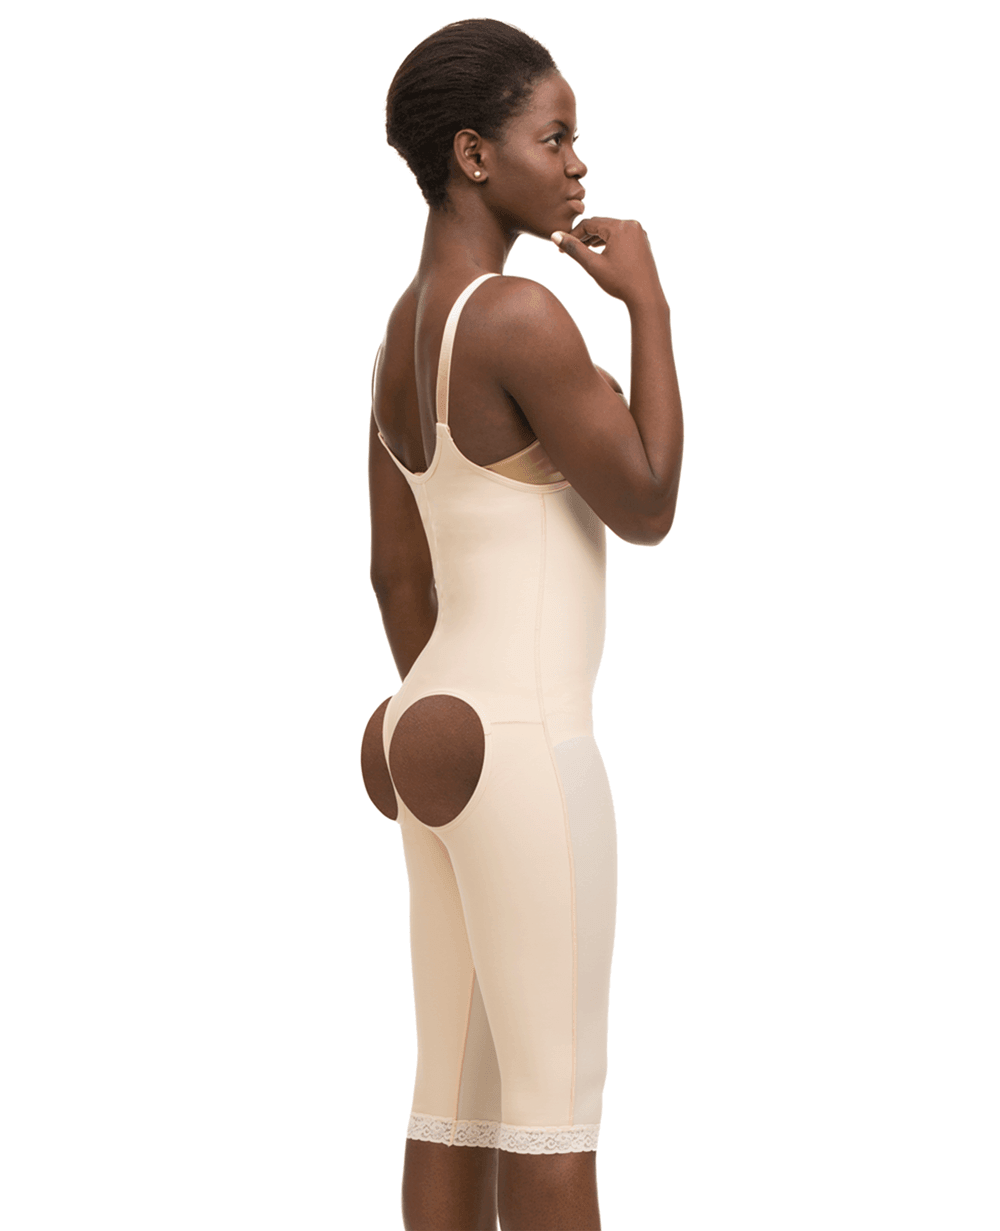 2nd Stage Body Suit Below Knee Length with Suspender Open Buttocks Enhancing Compression Girdle (BE06-BK) - Isavela Compression Garments